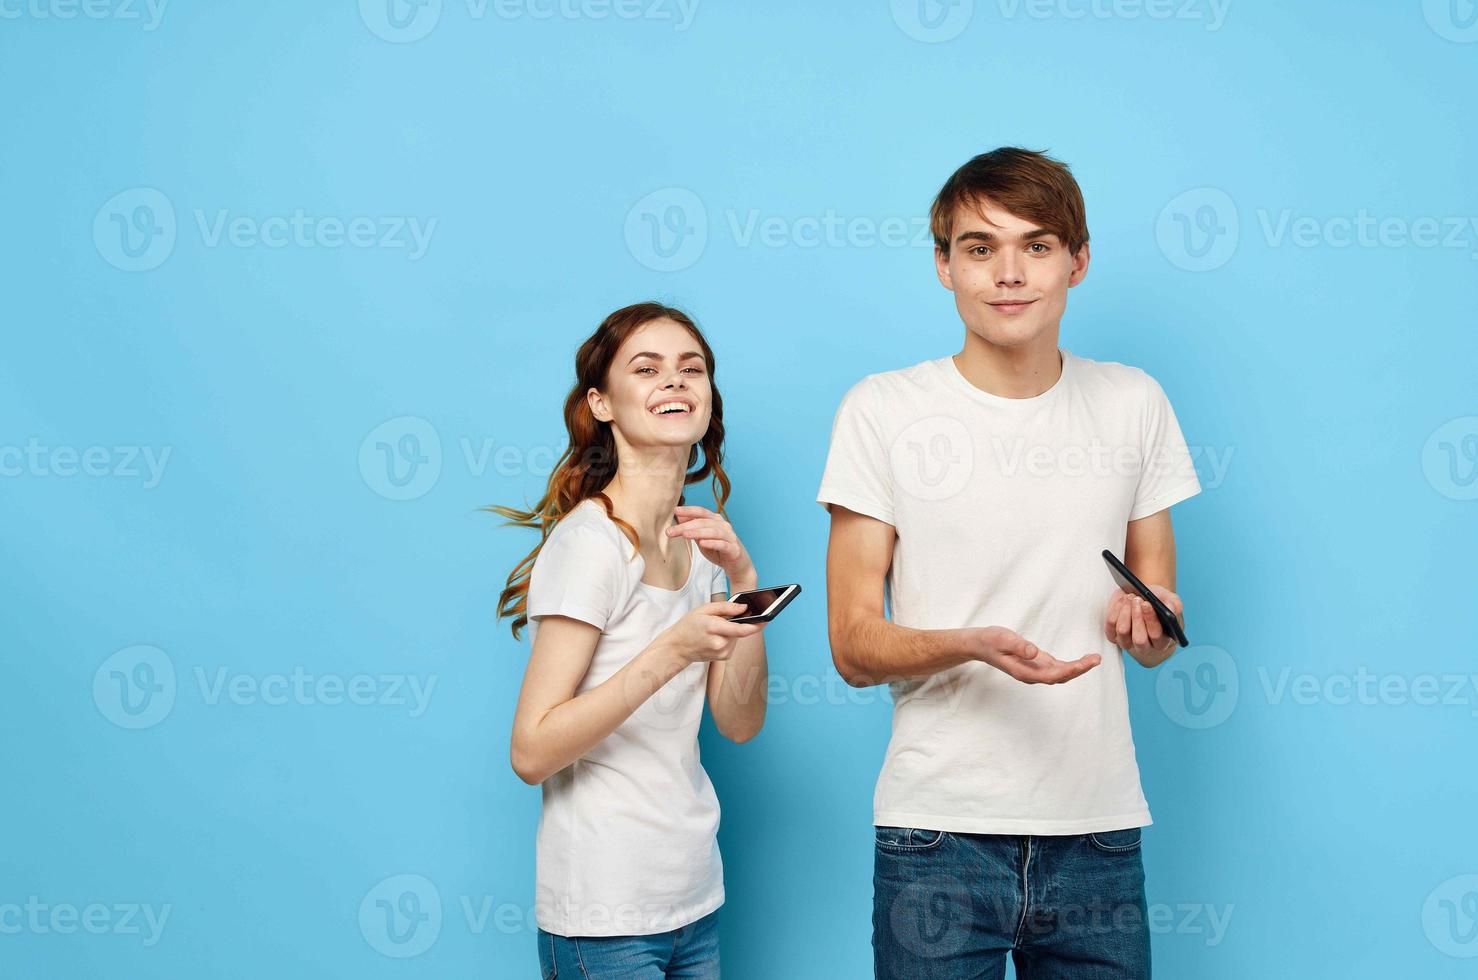 cheerful young couple in white t-shirts phones in hands communication lifestyle photo